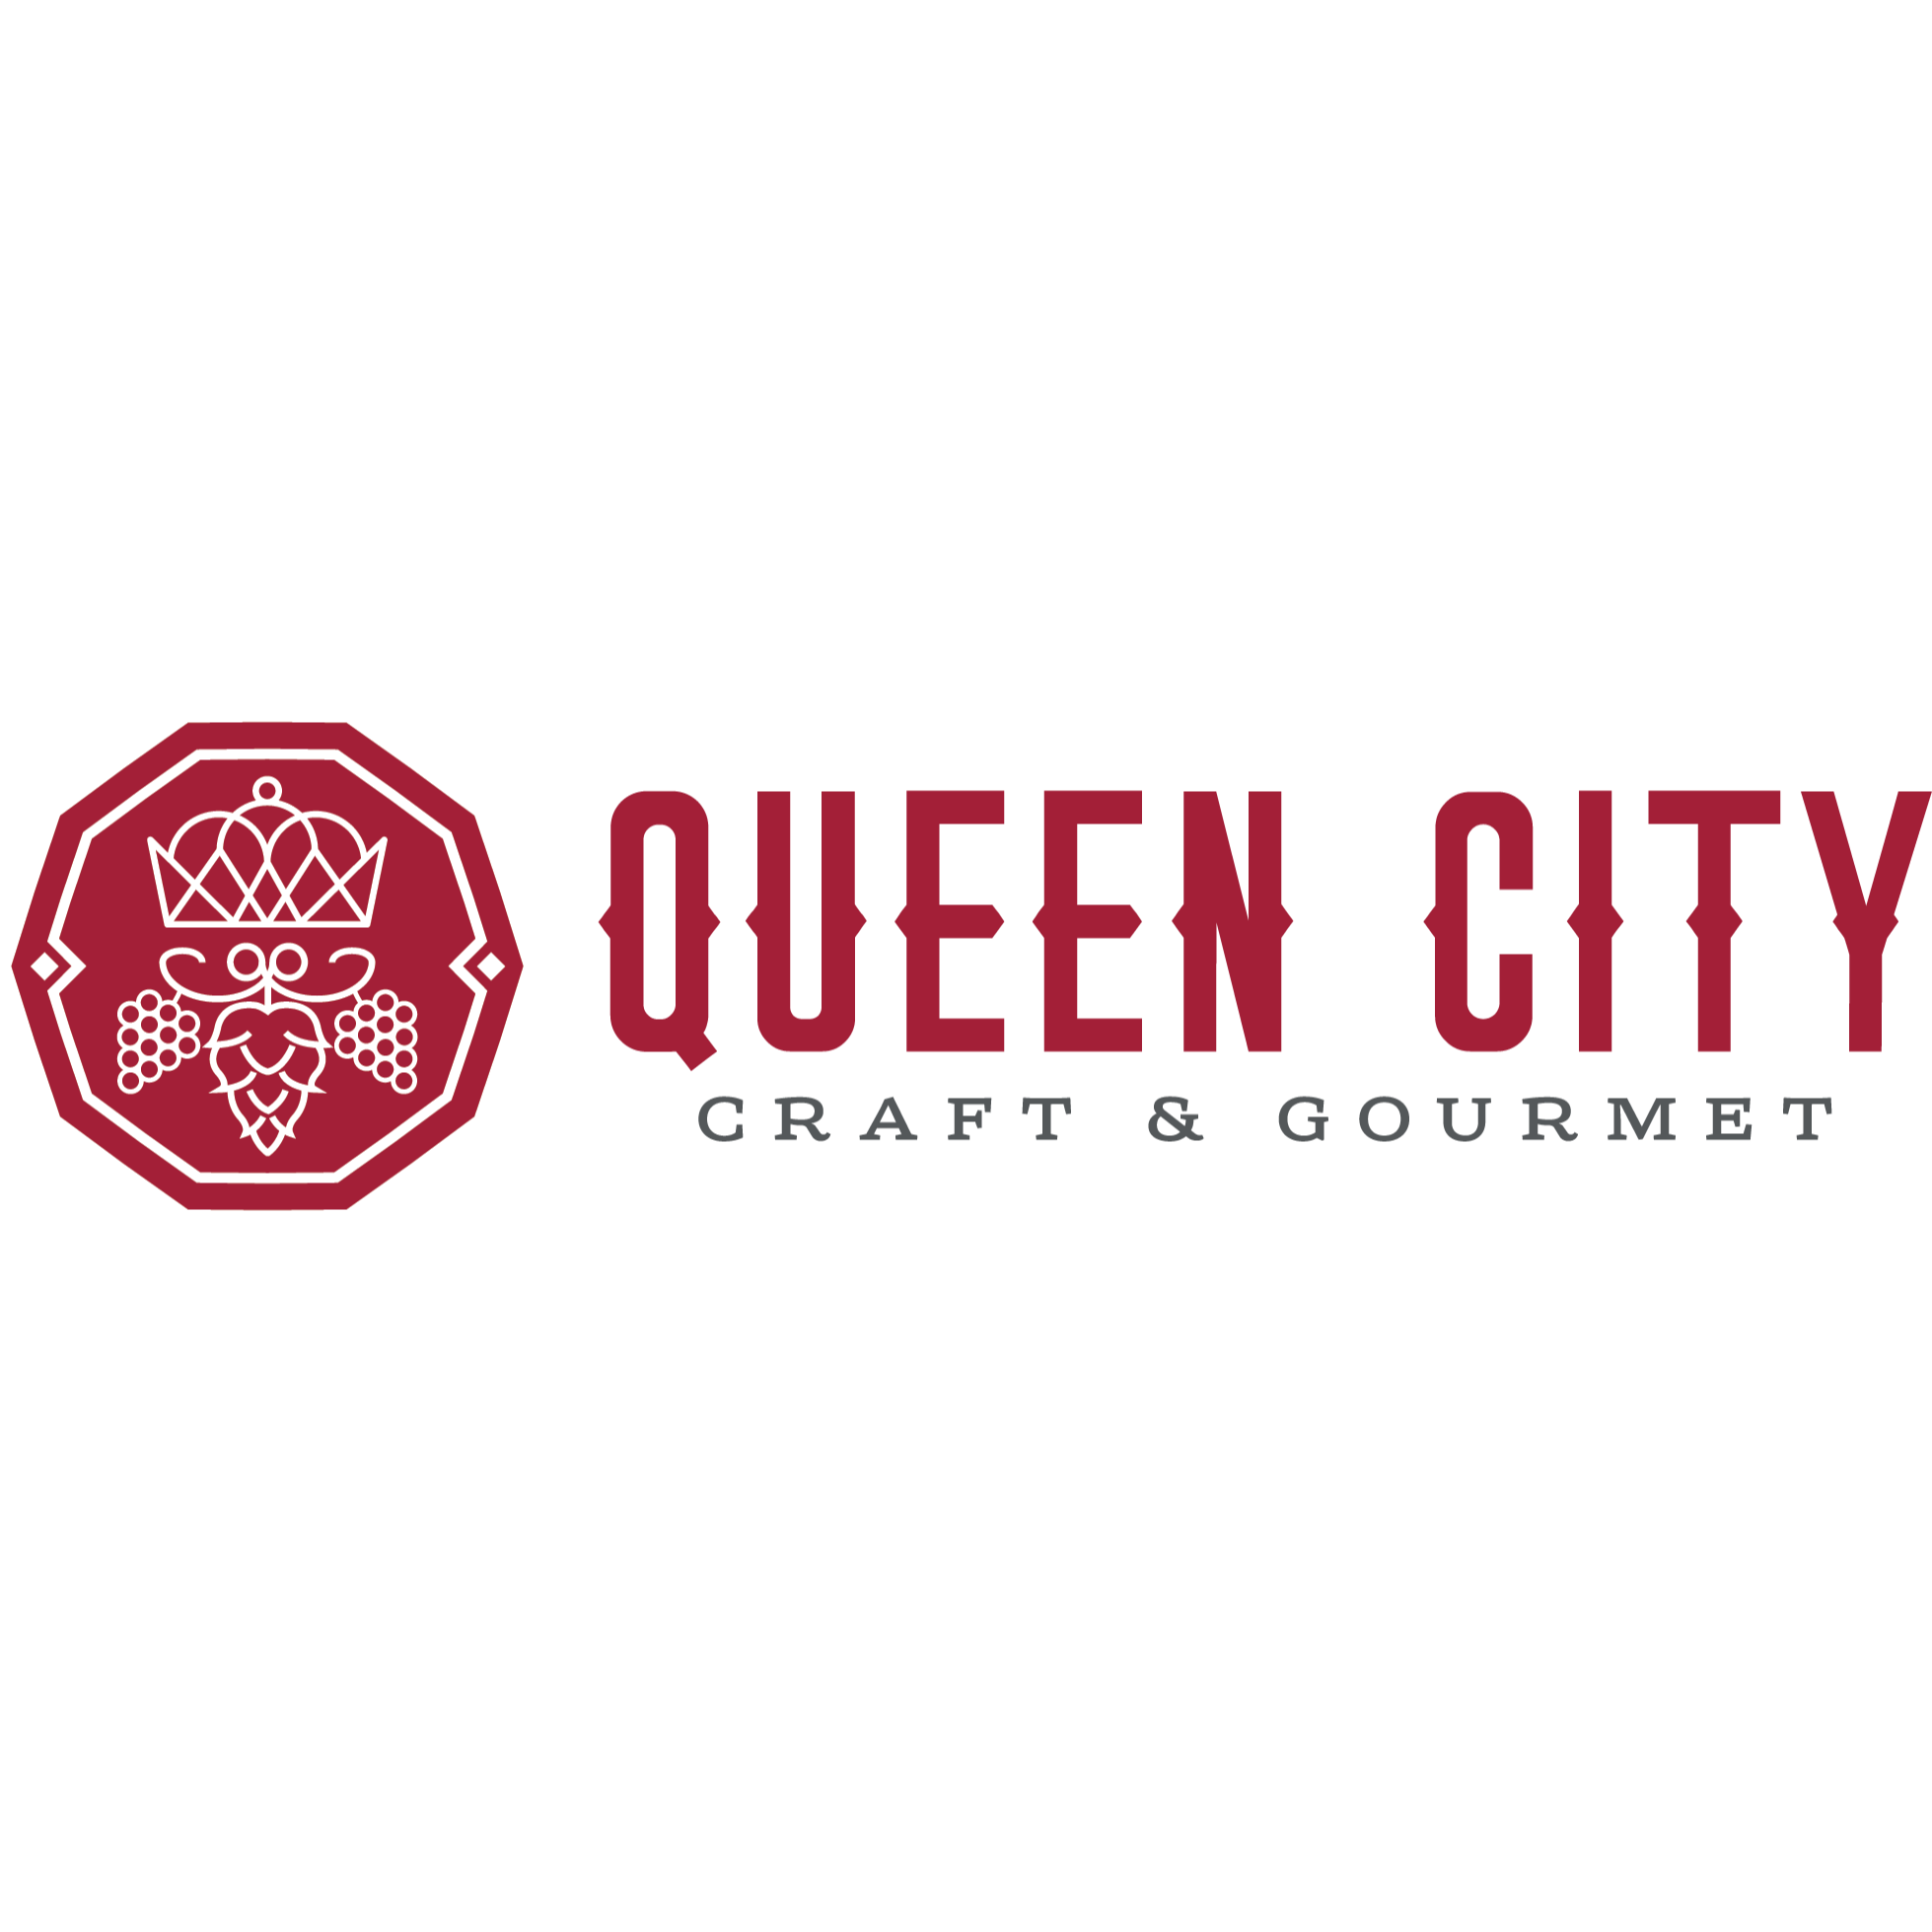 Queen City Craft and Gourmet - Charlotte, NC 28277 - (980)339-5610 | ShowMeLocal.com